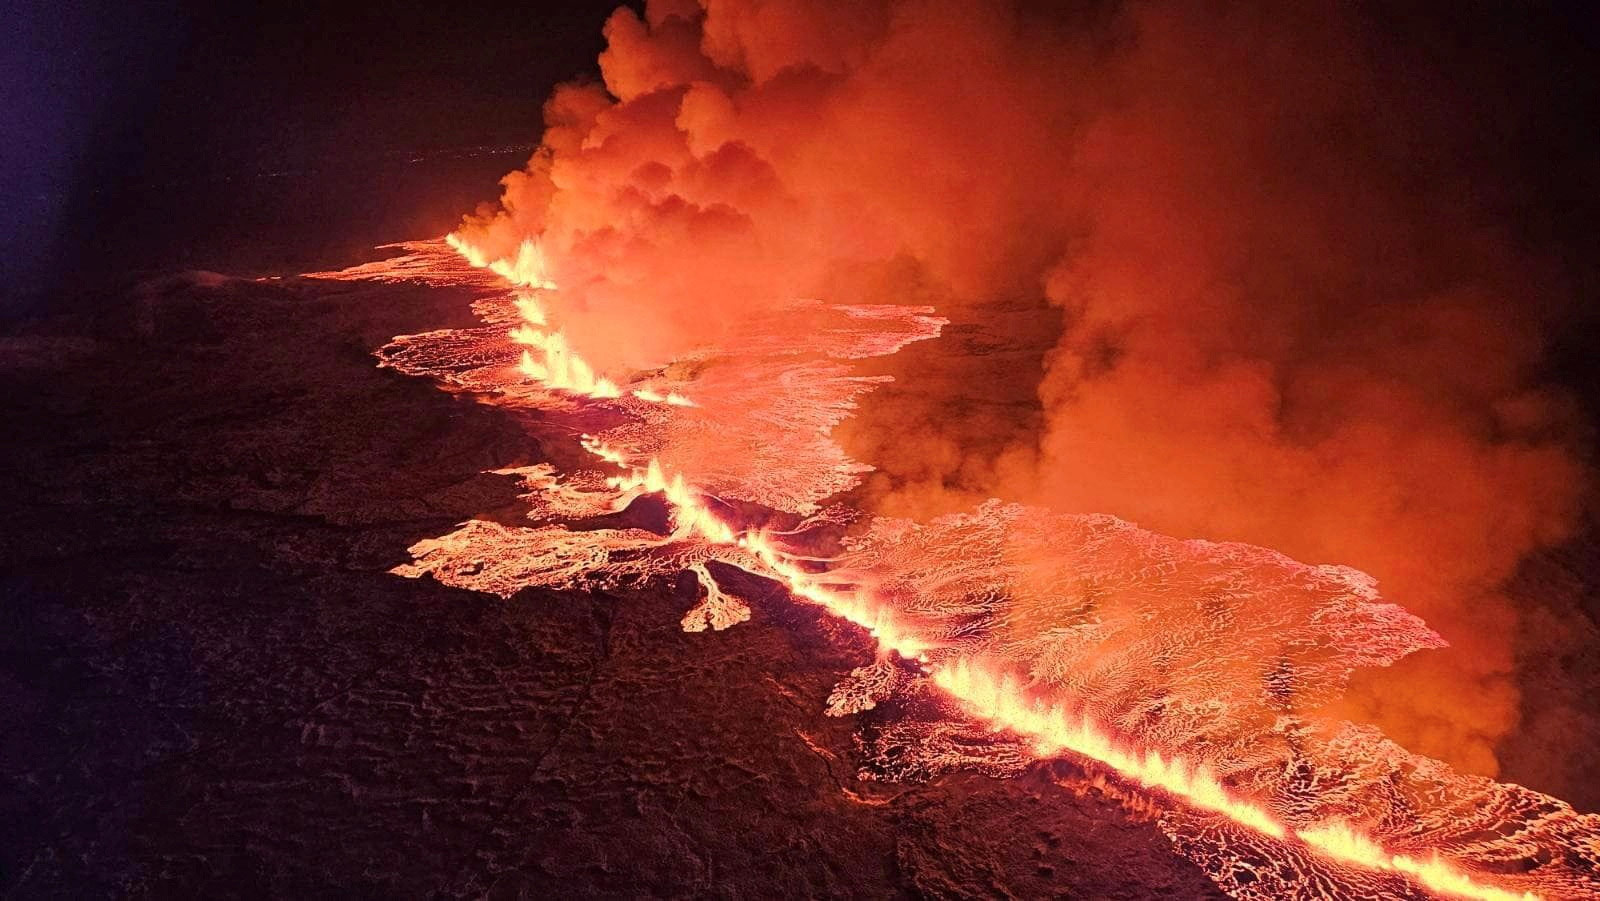 In Pictures Volcano Spews Lava After Erupting In Iceland Bbc News 